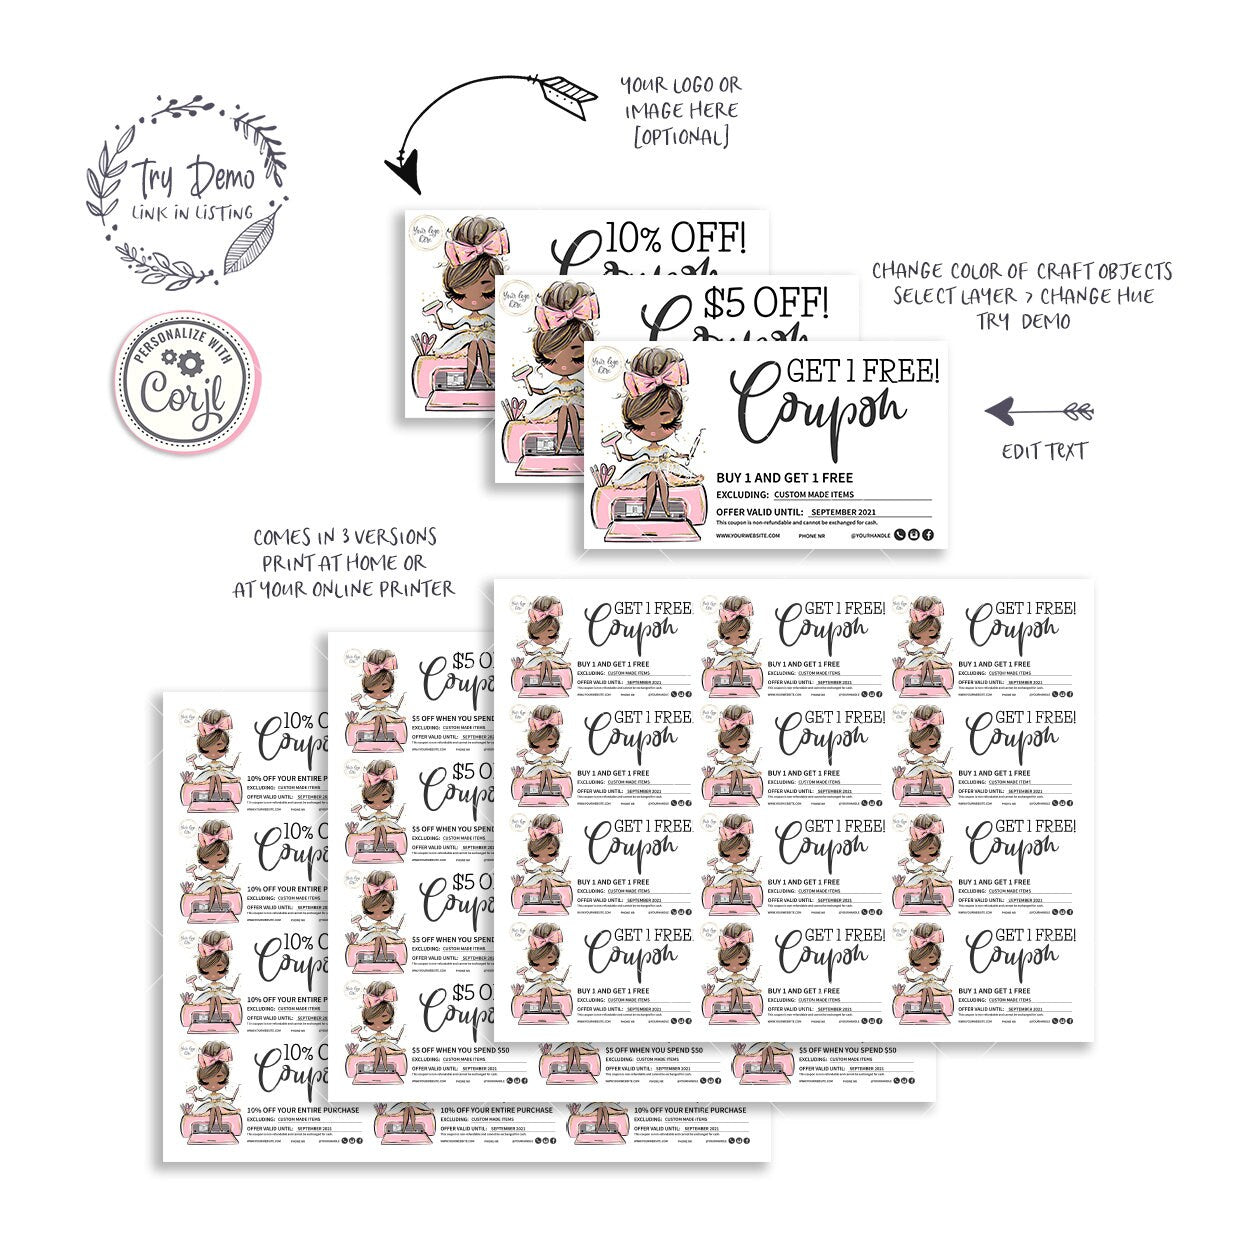 Handcrafter Business Coupons, Craft Shop Gift Cards